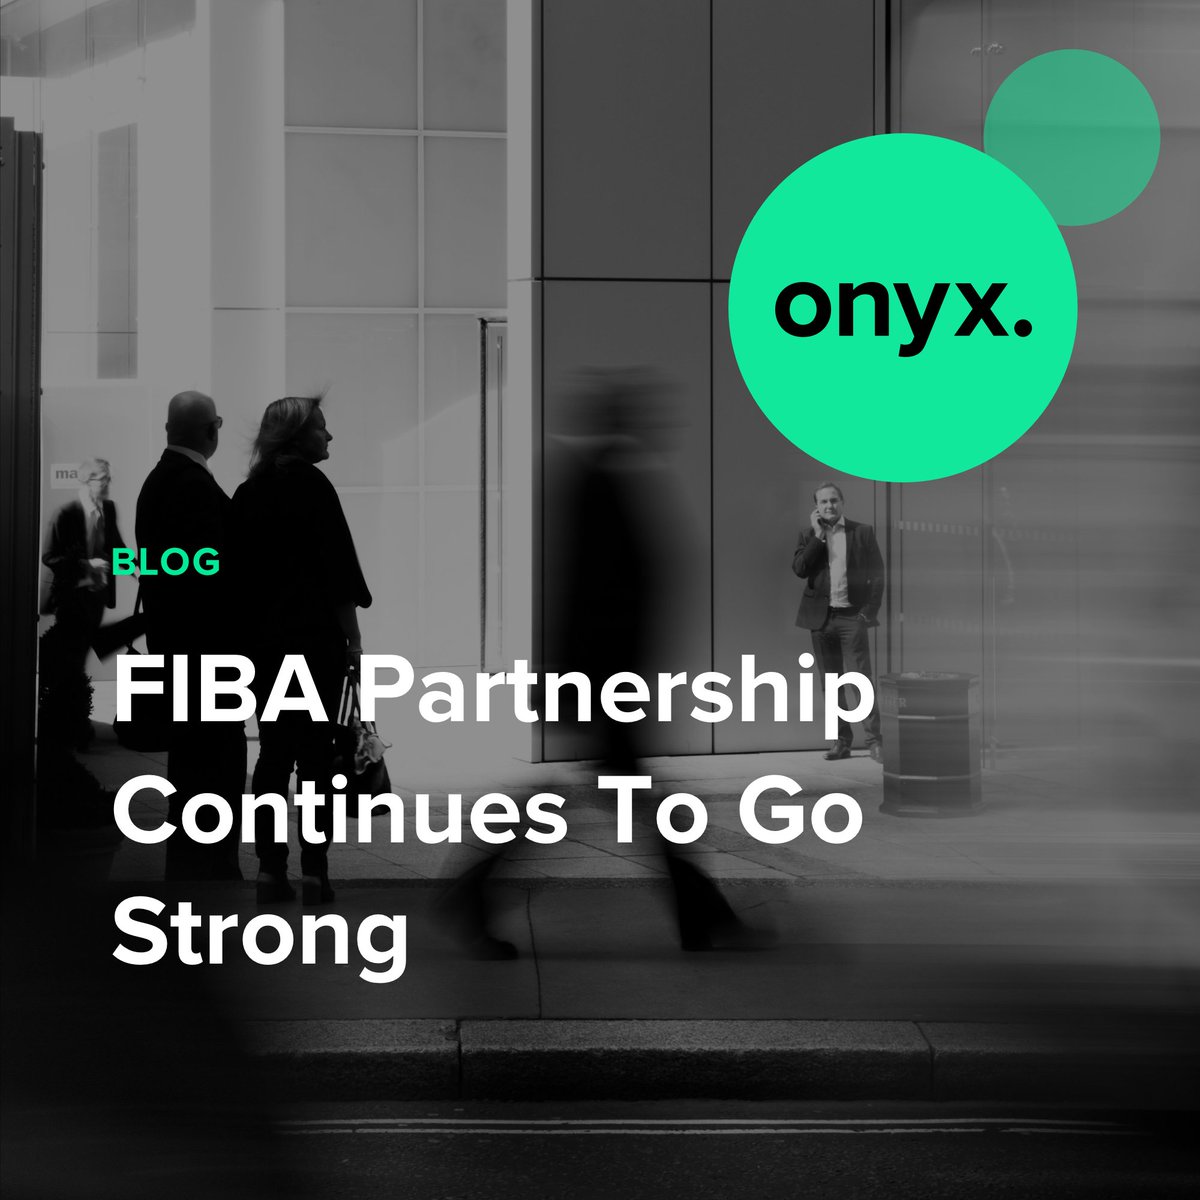 Our relationship with the Financial Intermediary & Broker Association (FIBA) has led to some meaningful connections in the last 12 months - long may it continue! ow.ly/9JUE50QVlL1 

#PropertyBrokers #FIBA #PropertyDevelopment #PropertyFinance #AssetFinance #BridgingLoans